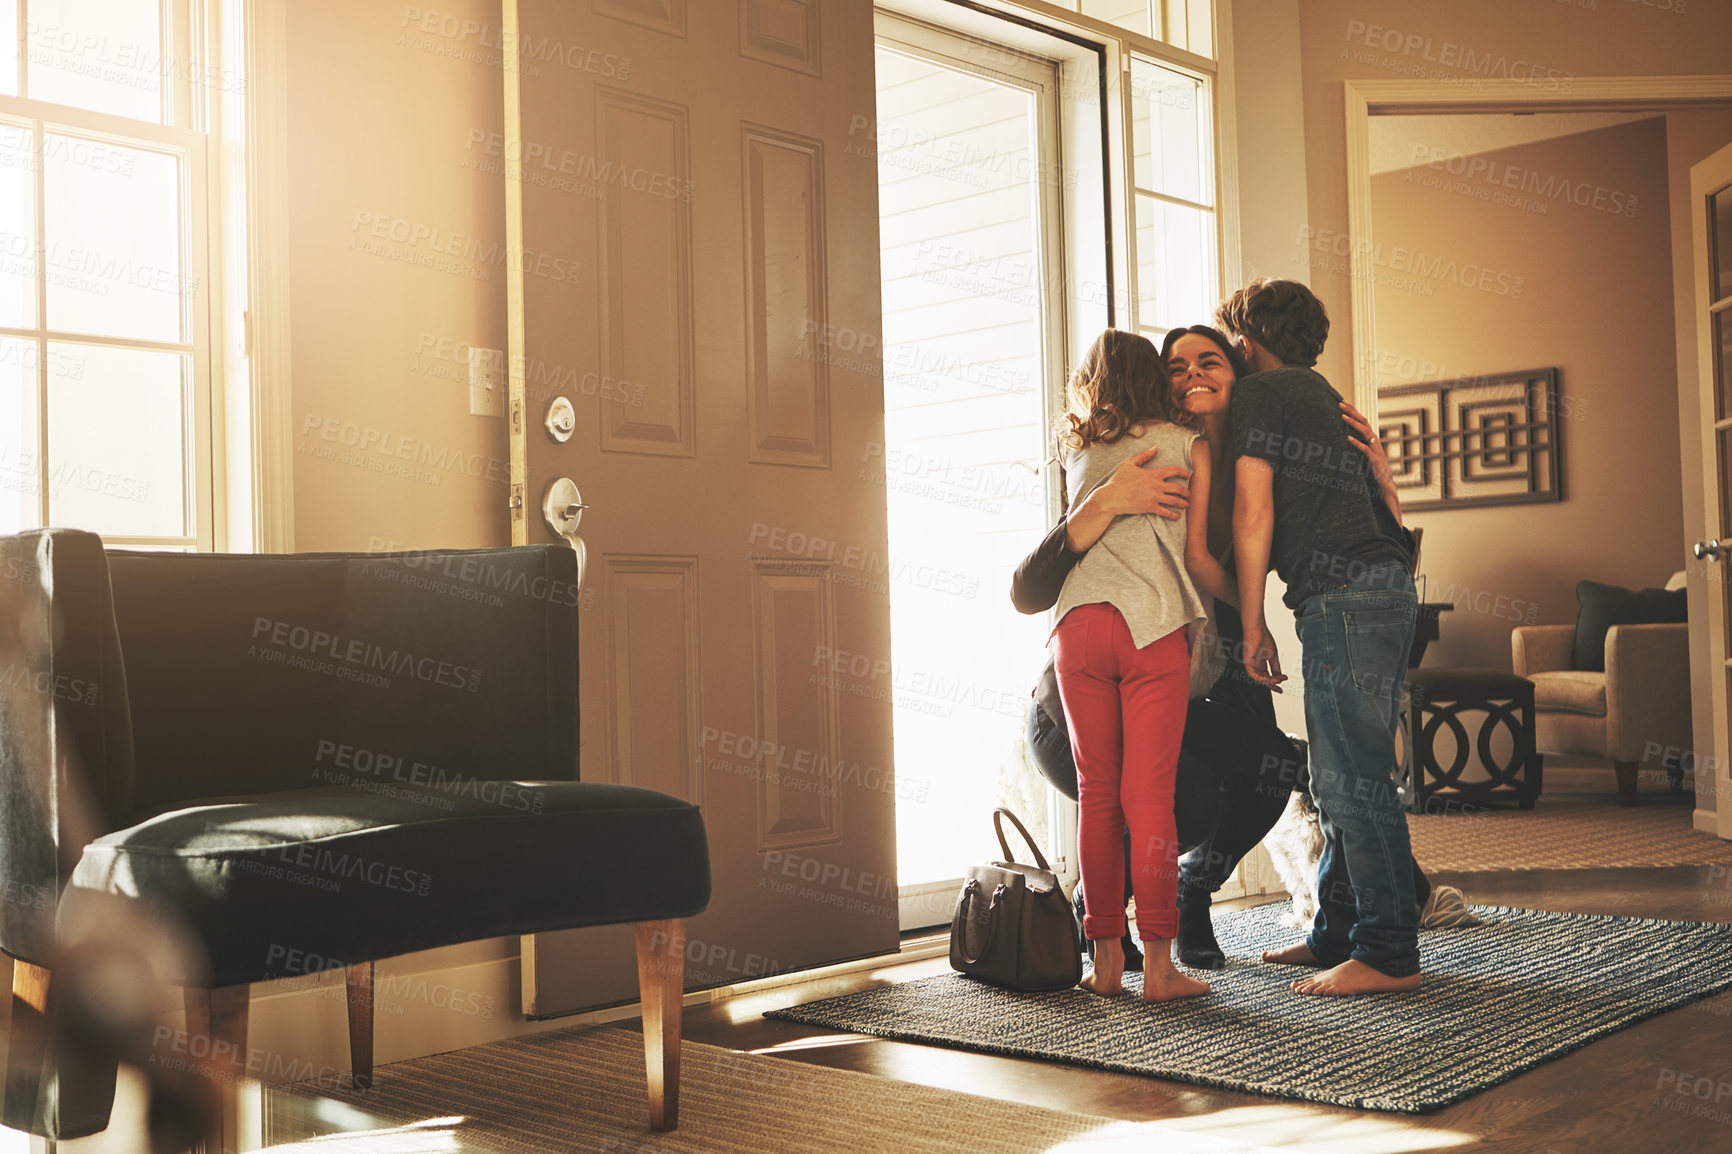 Buy stock photo Home, love and a mother hugging her kids after arriving through the front door after work during the day. Greeting, family or children with a woman holding her son and daughter in the living room